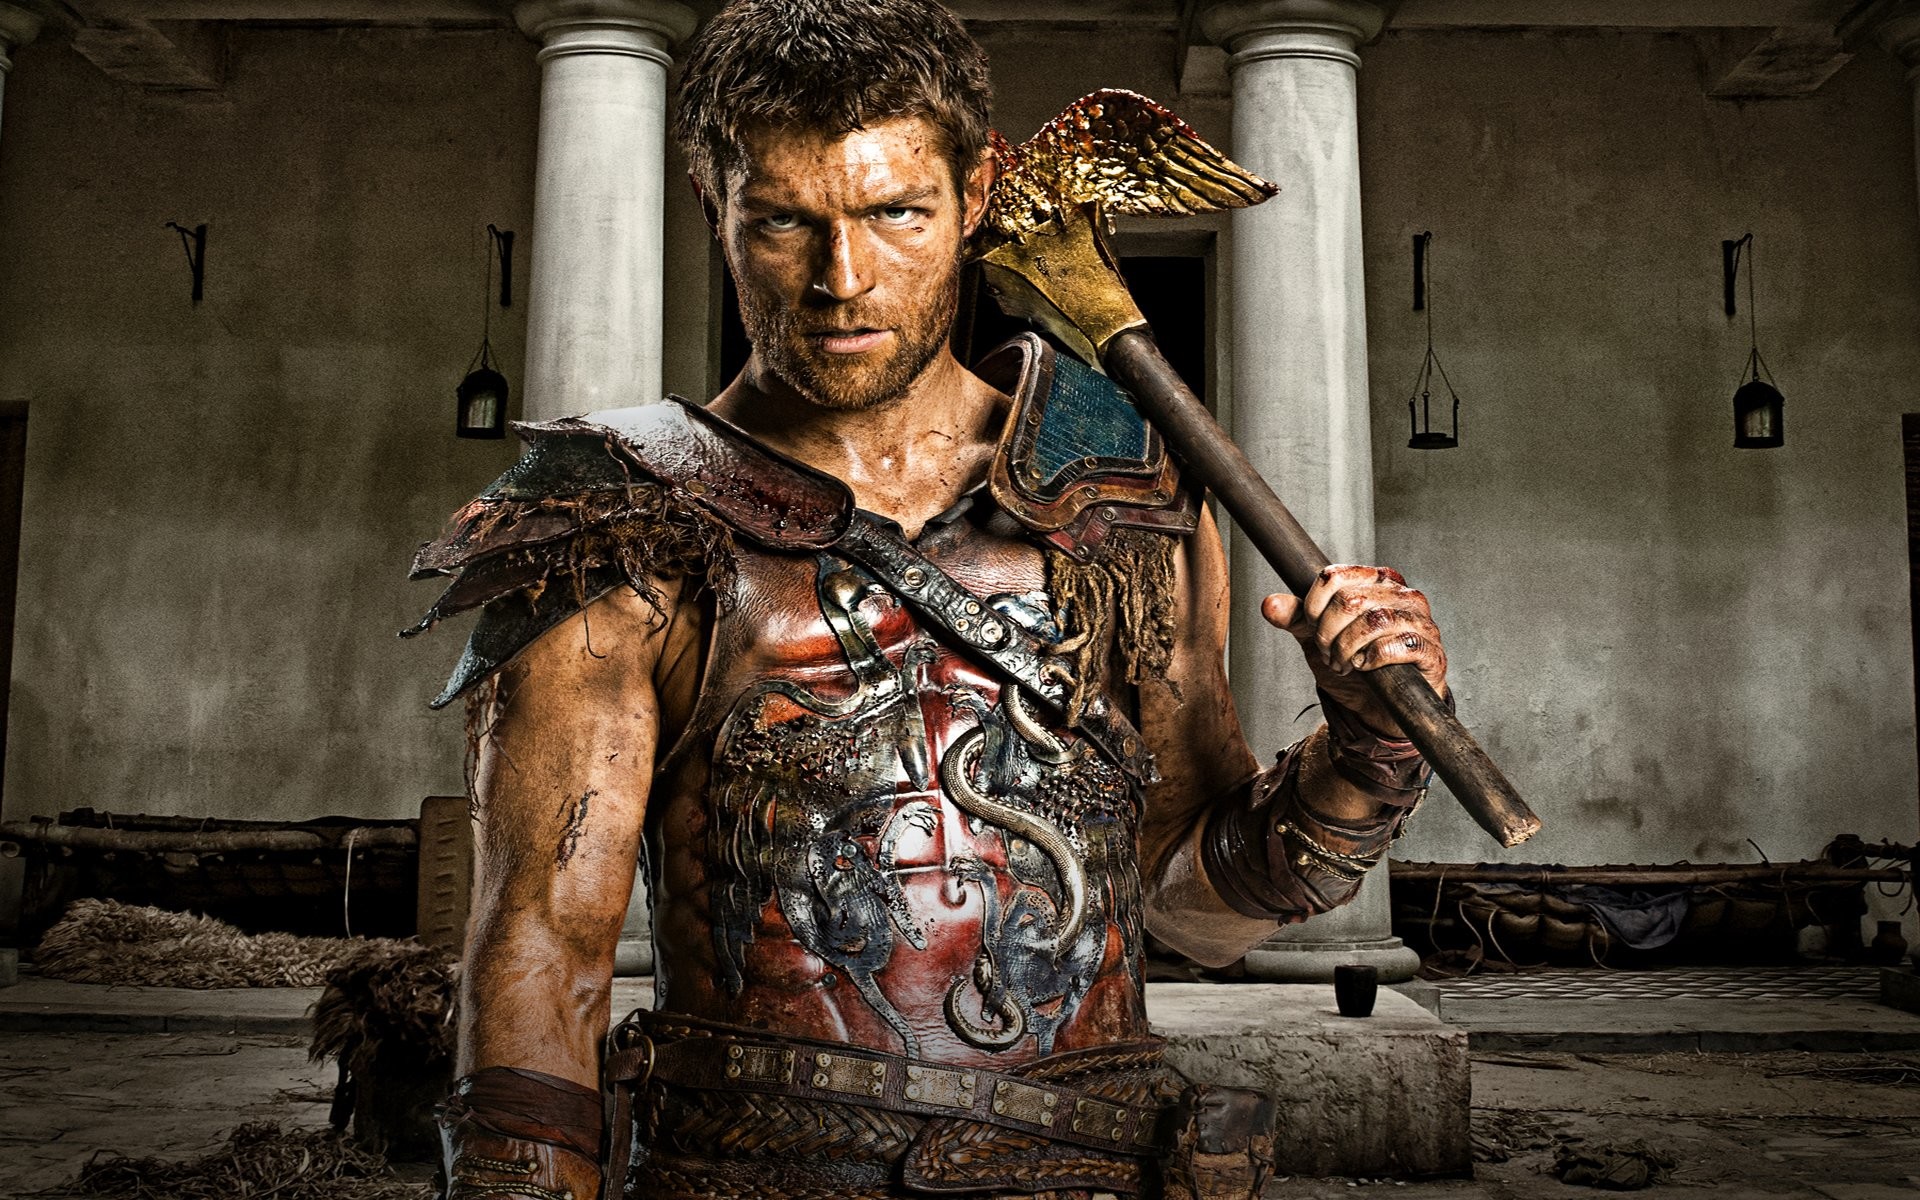 1920x1200 TV Show - Spartacus Spartacus: War of the Damned Wallpaper